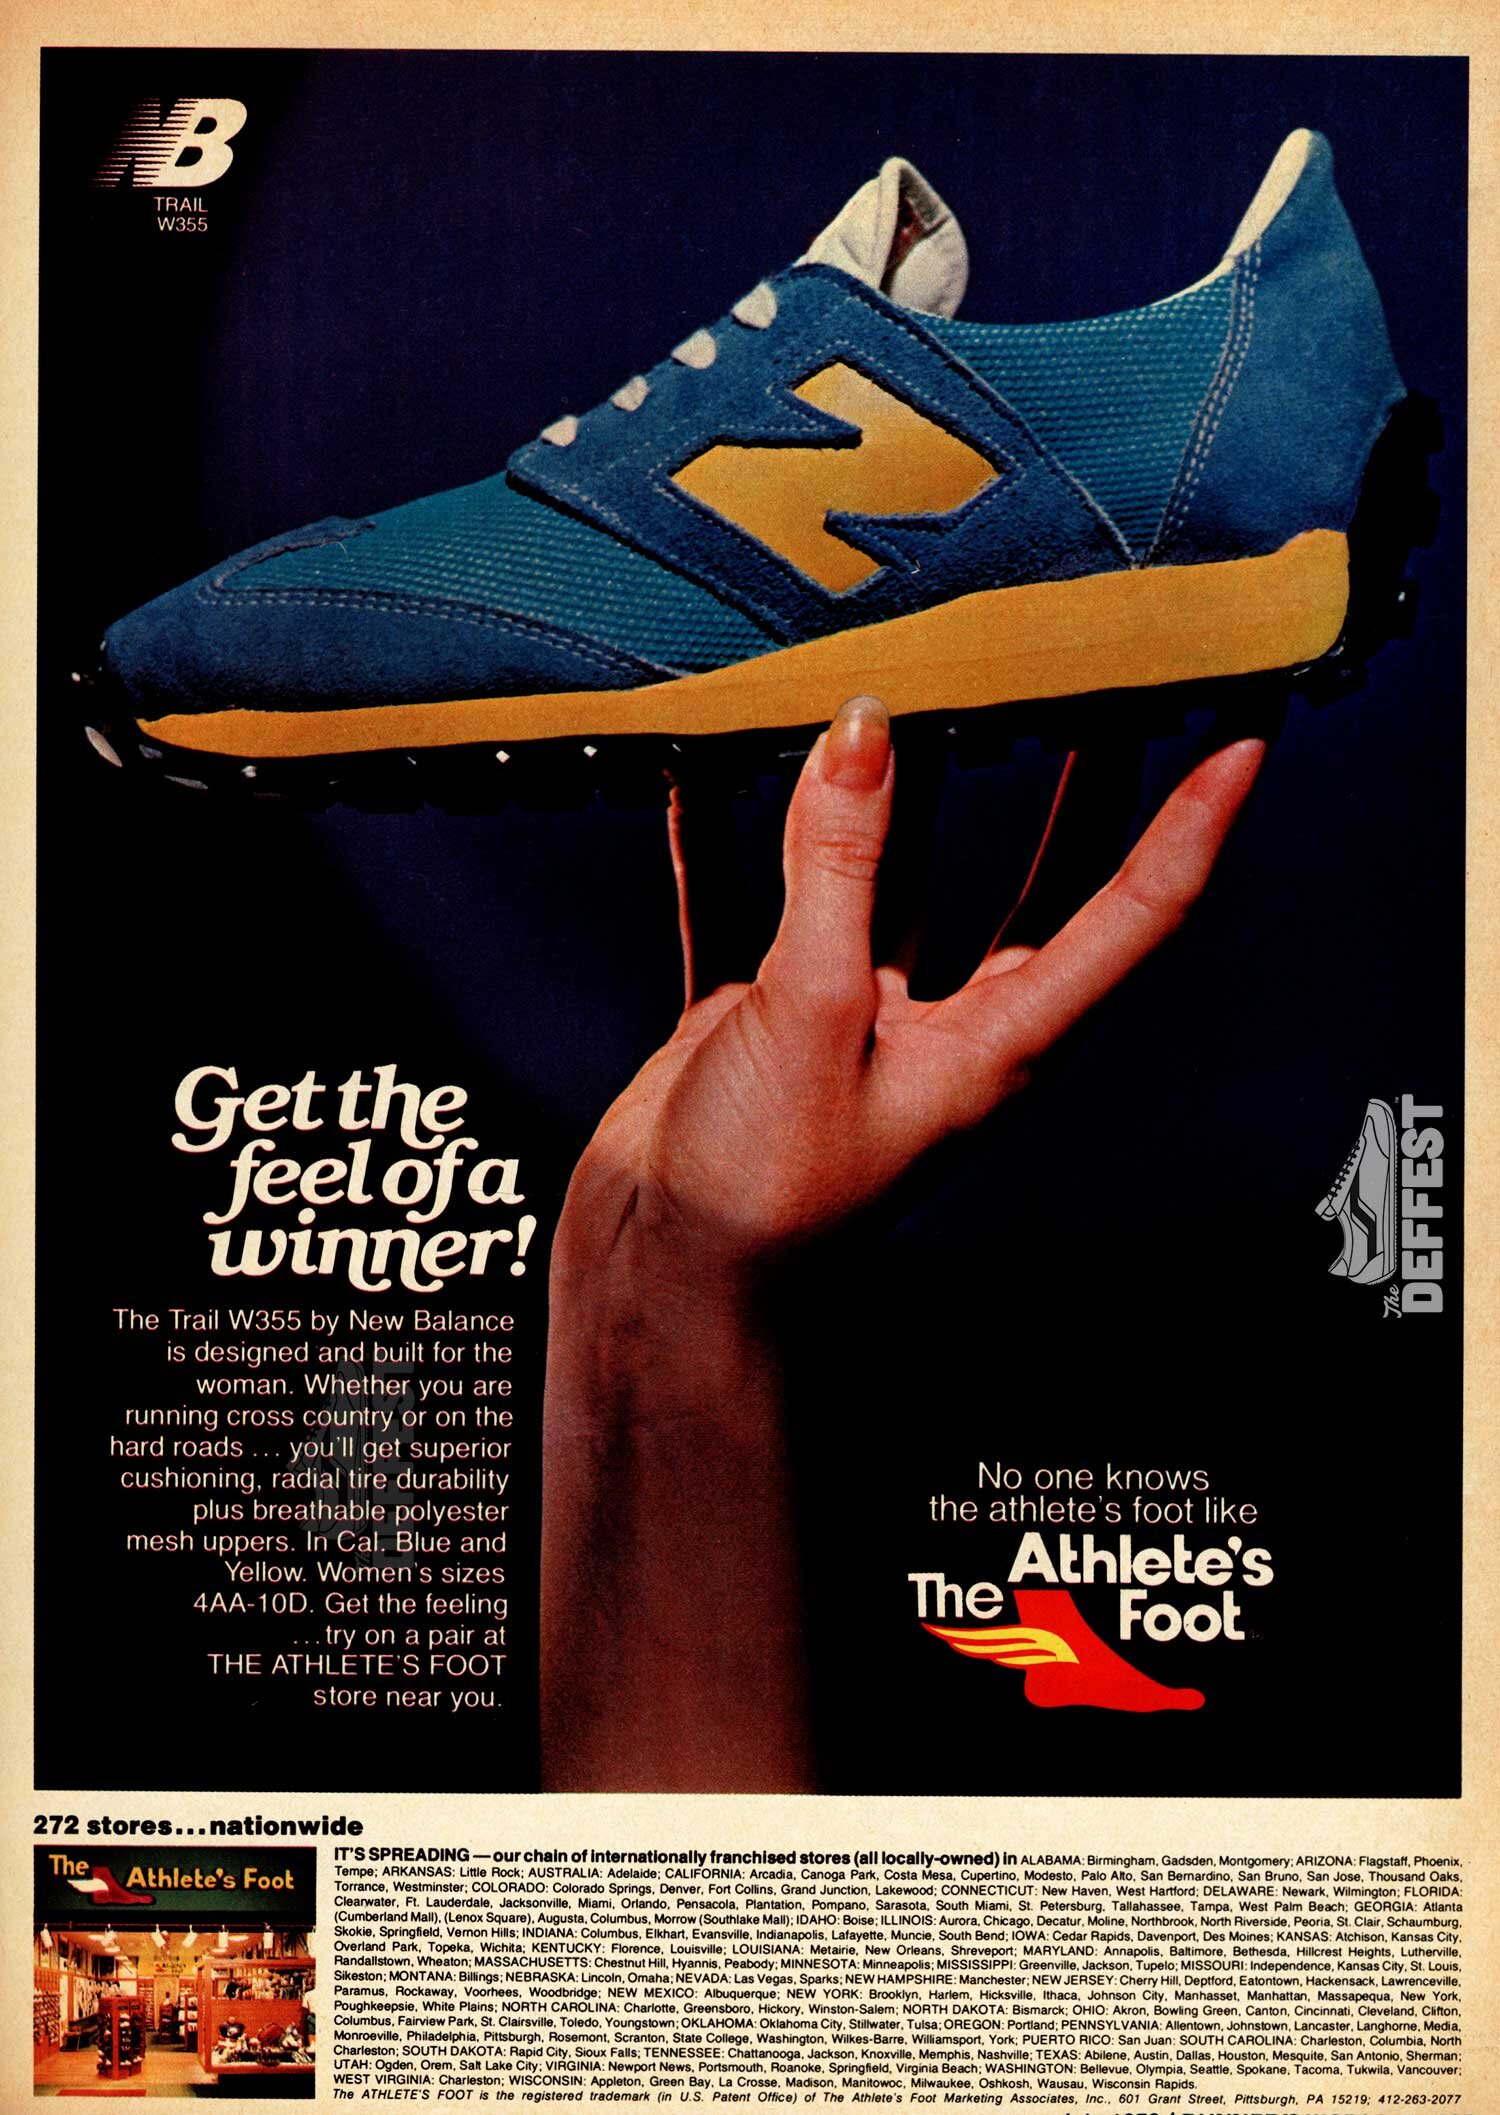 vintage sneakers — The Deffest®. A vintage and retro sneaker blog 